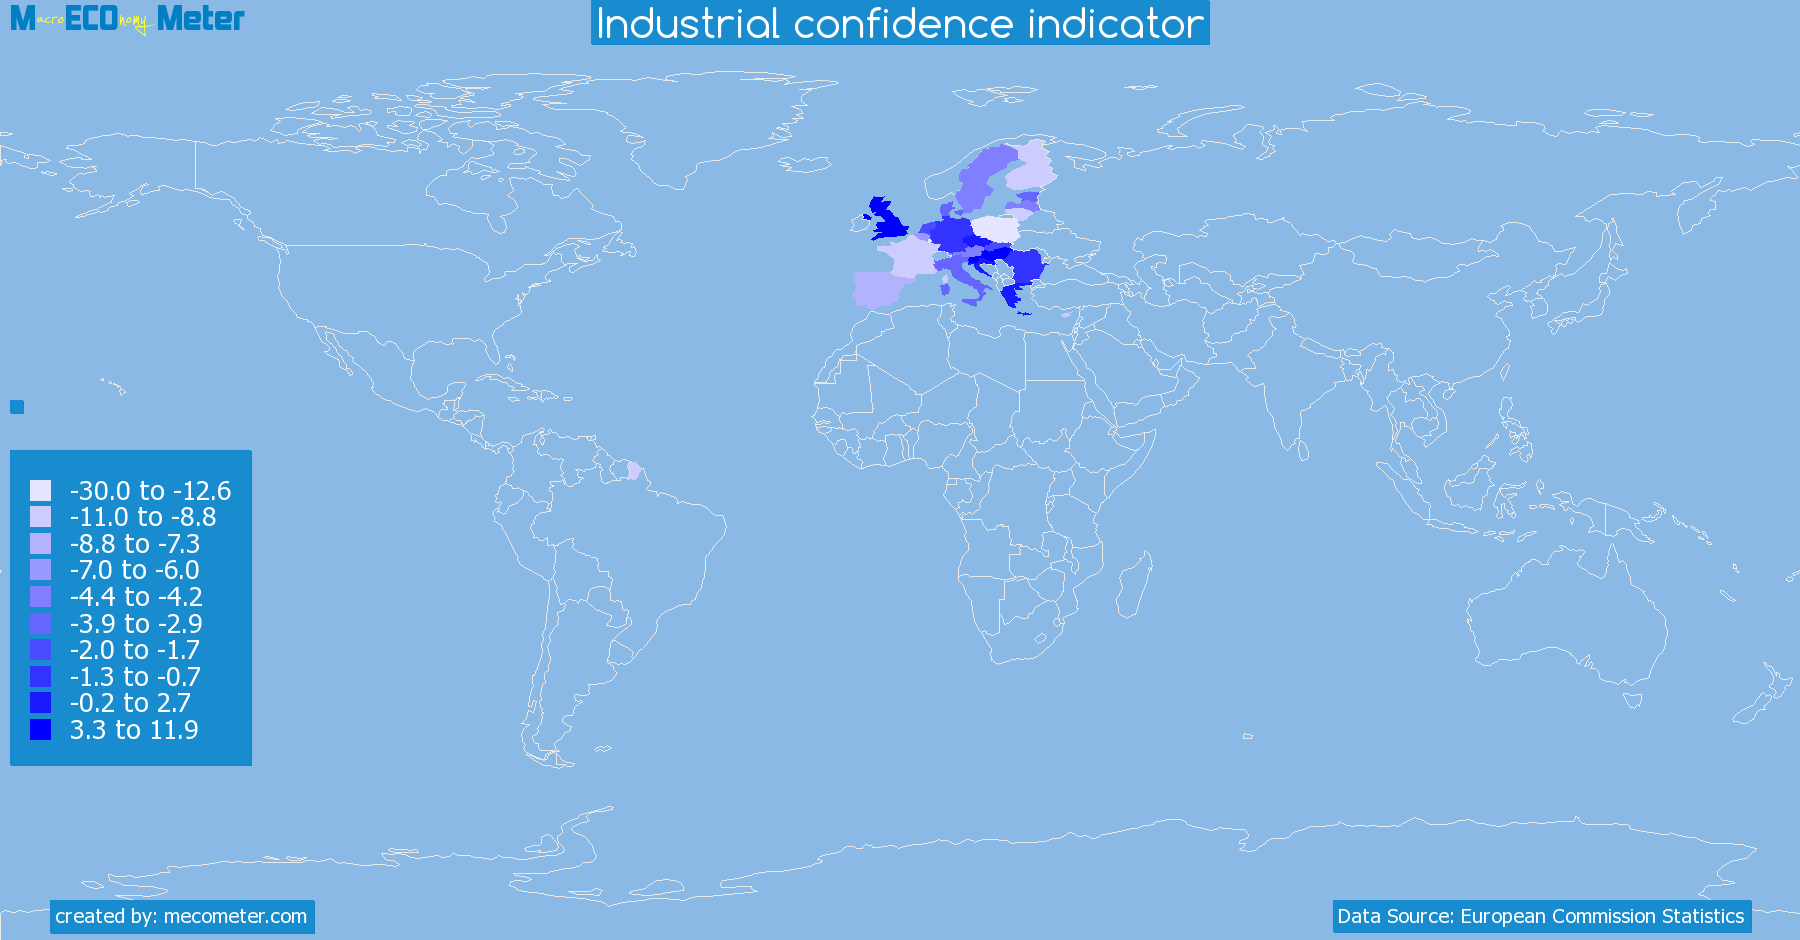 Industrial confidence indicator